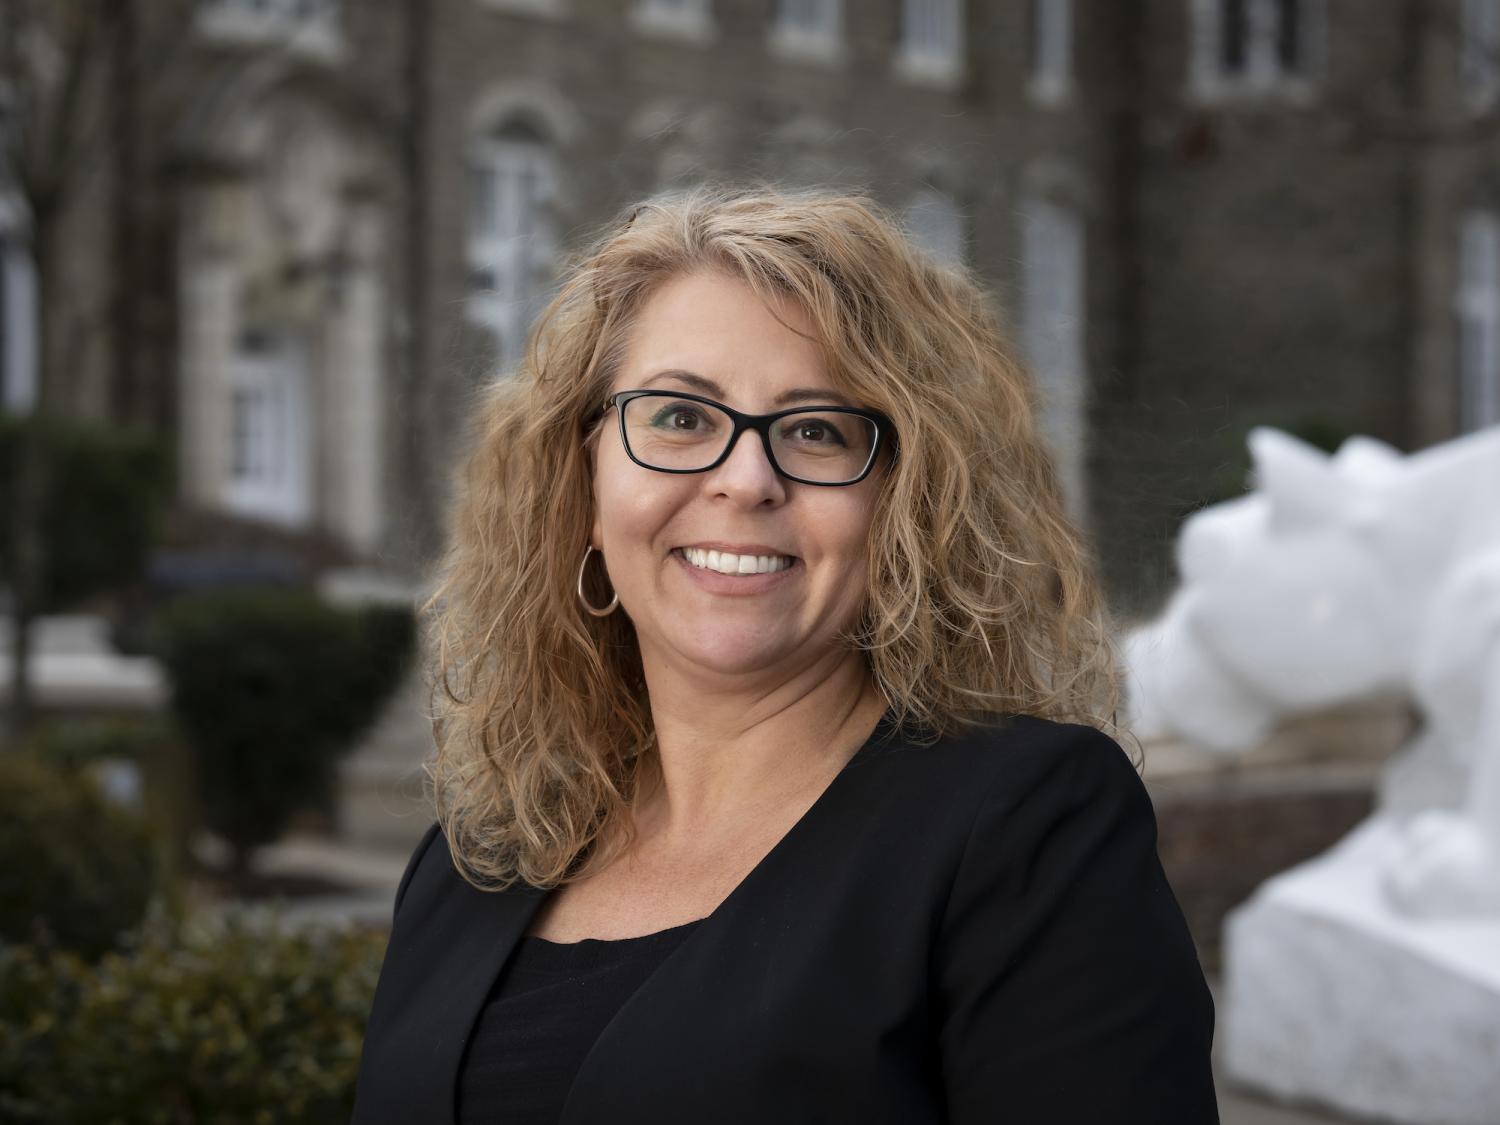 Margo DelliCarpini, chancellor and dean of Penn State Abington, has been named vice president for Commonwealth Campuses and executive chancellor, effective Oct. 1. Credit: Penn State. Creative Commons